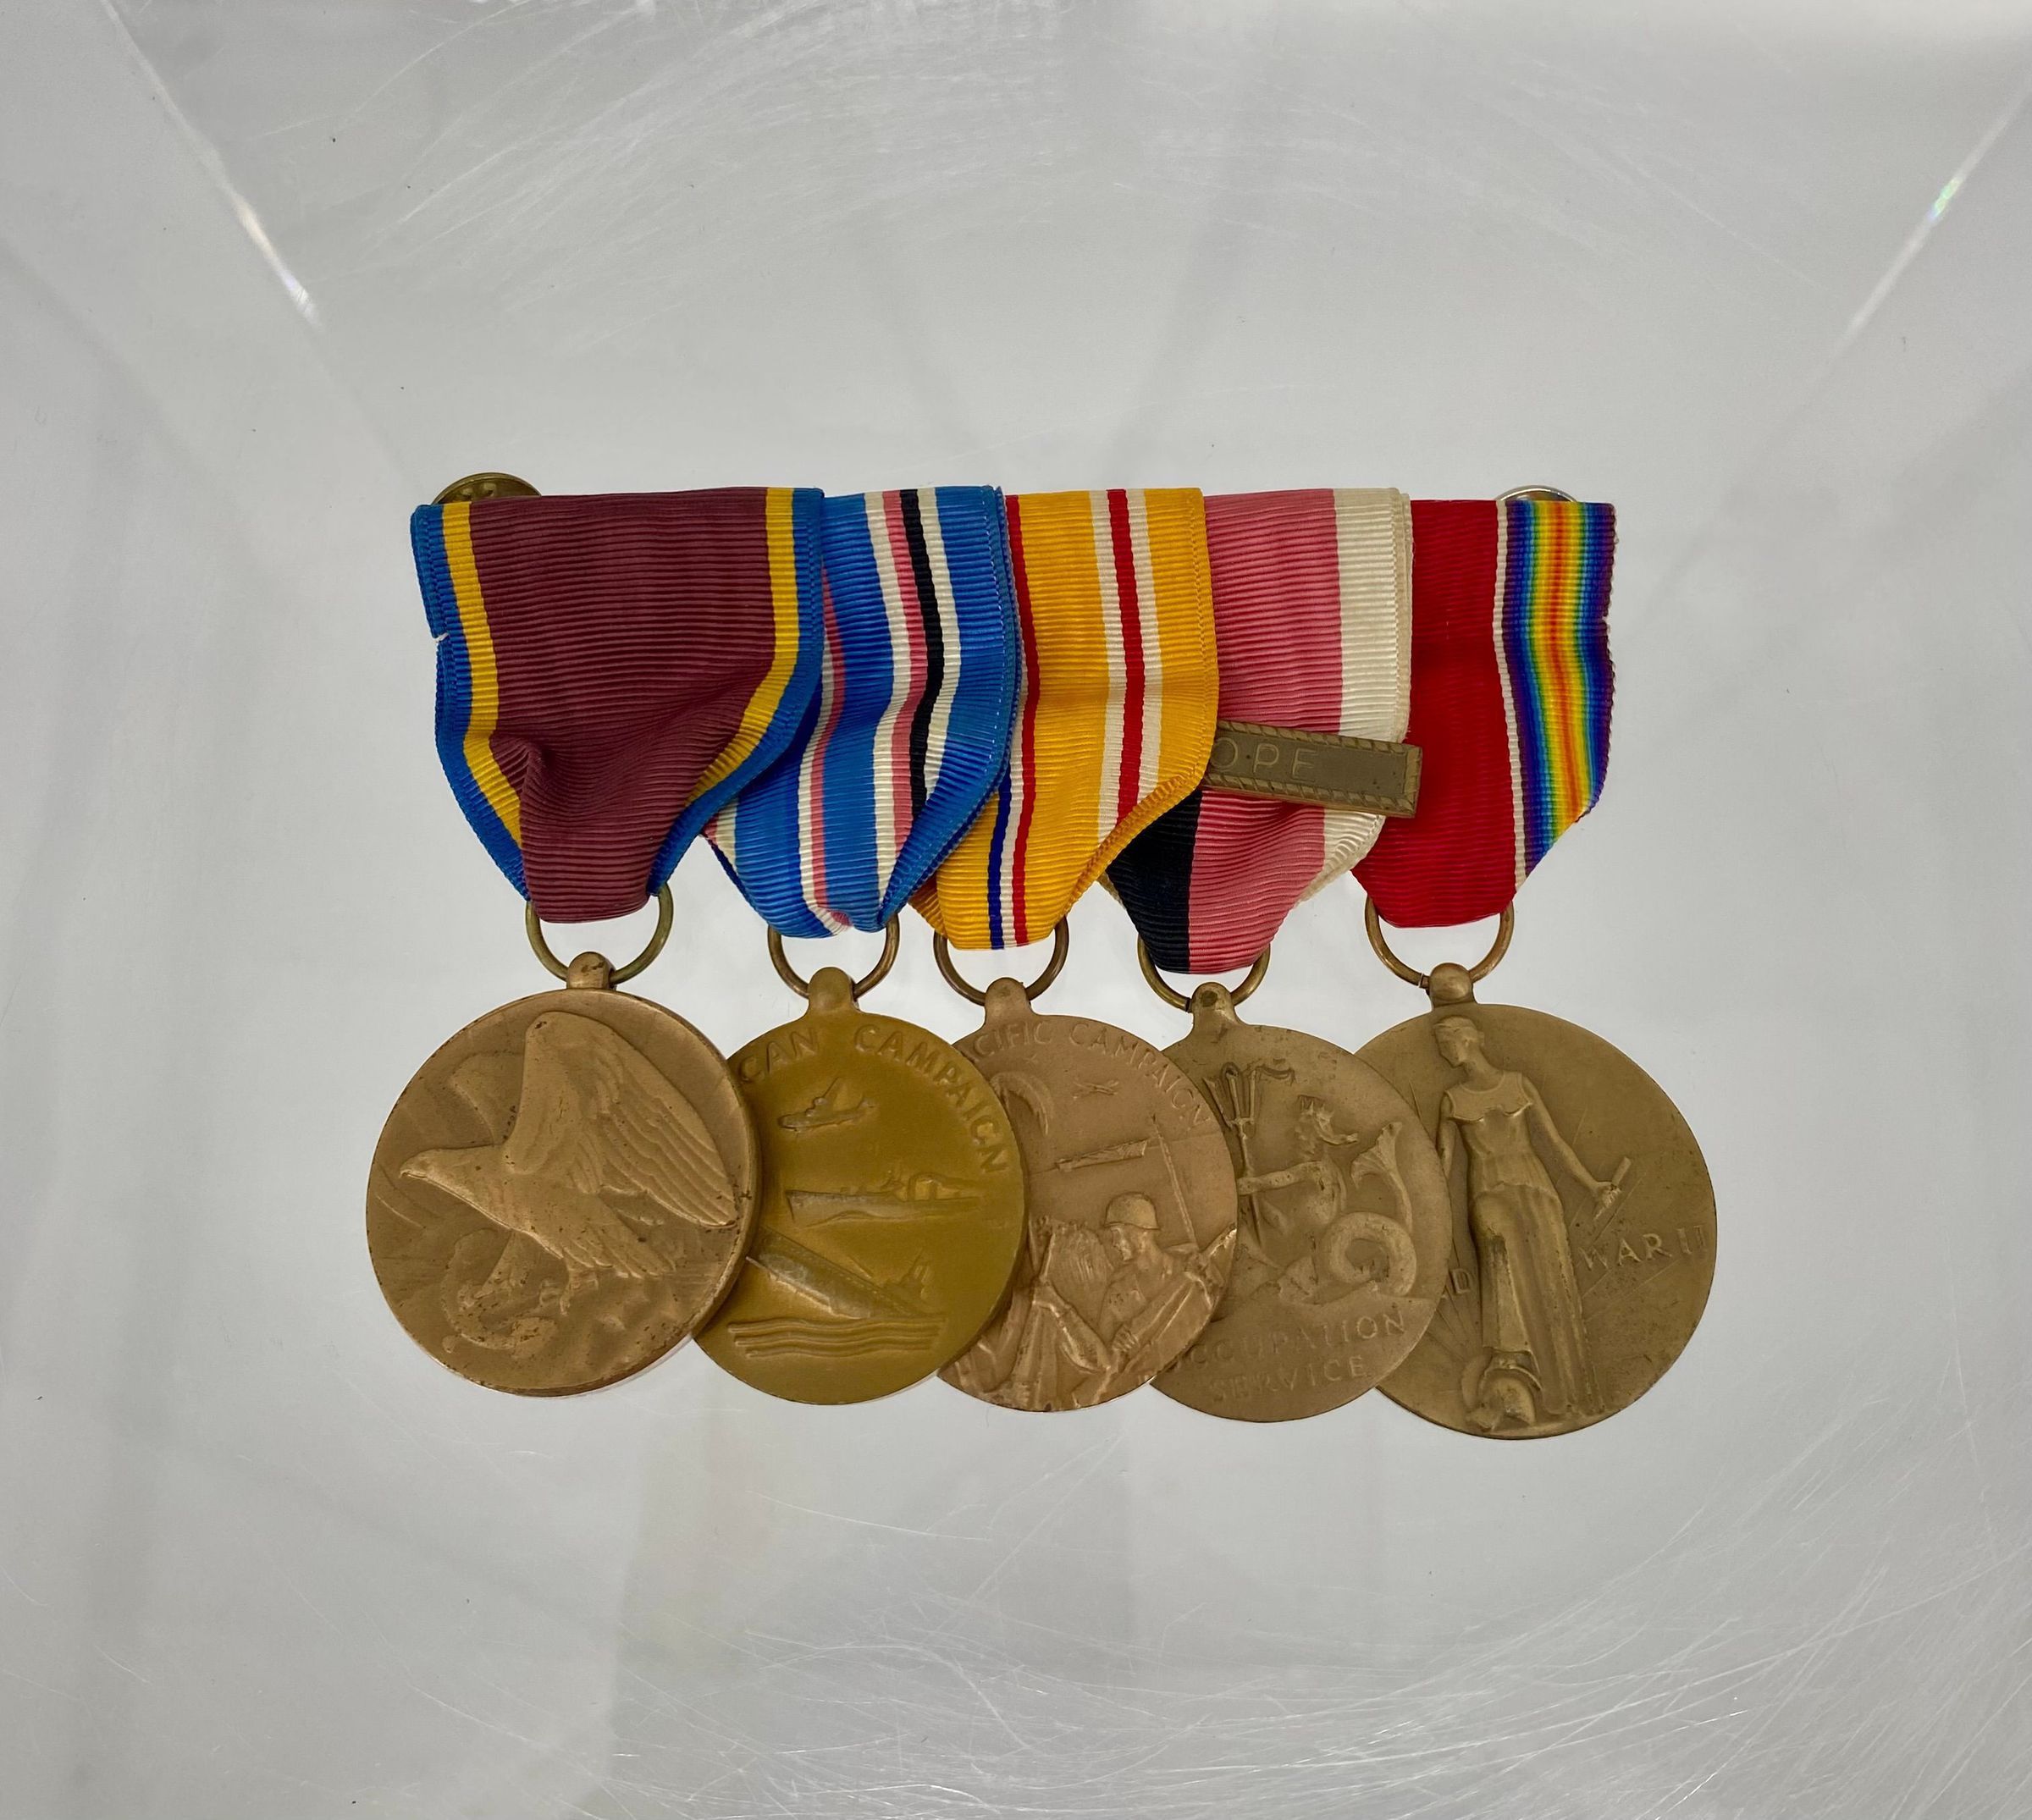 Primary Image of Medal Cluster of Gerald Hennesy